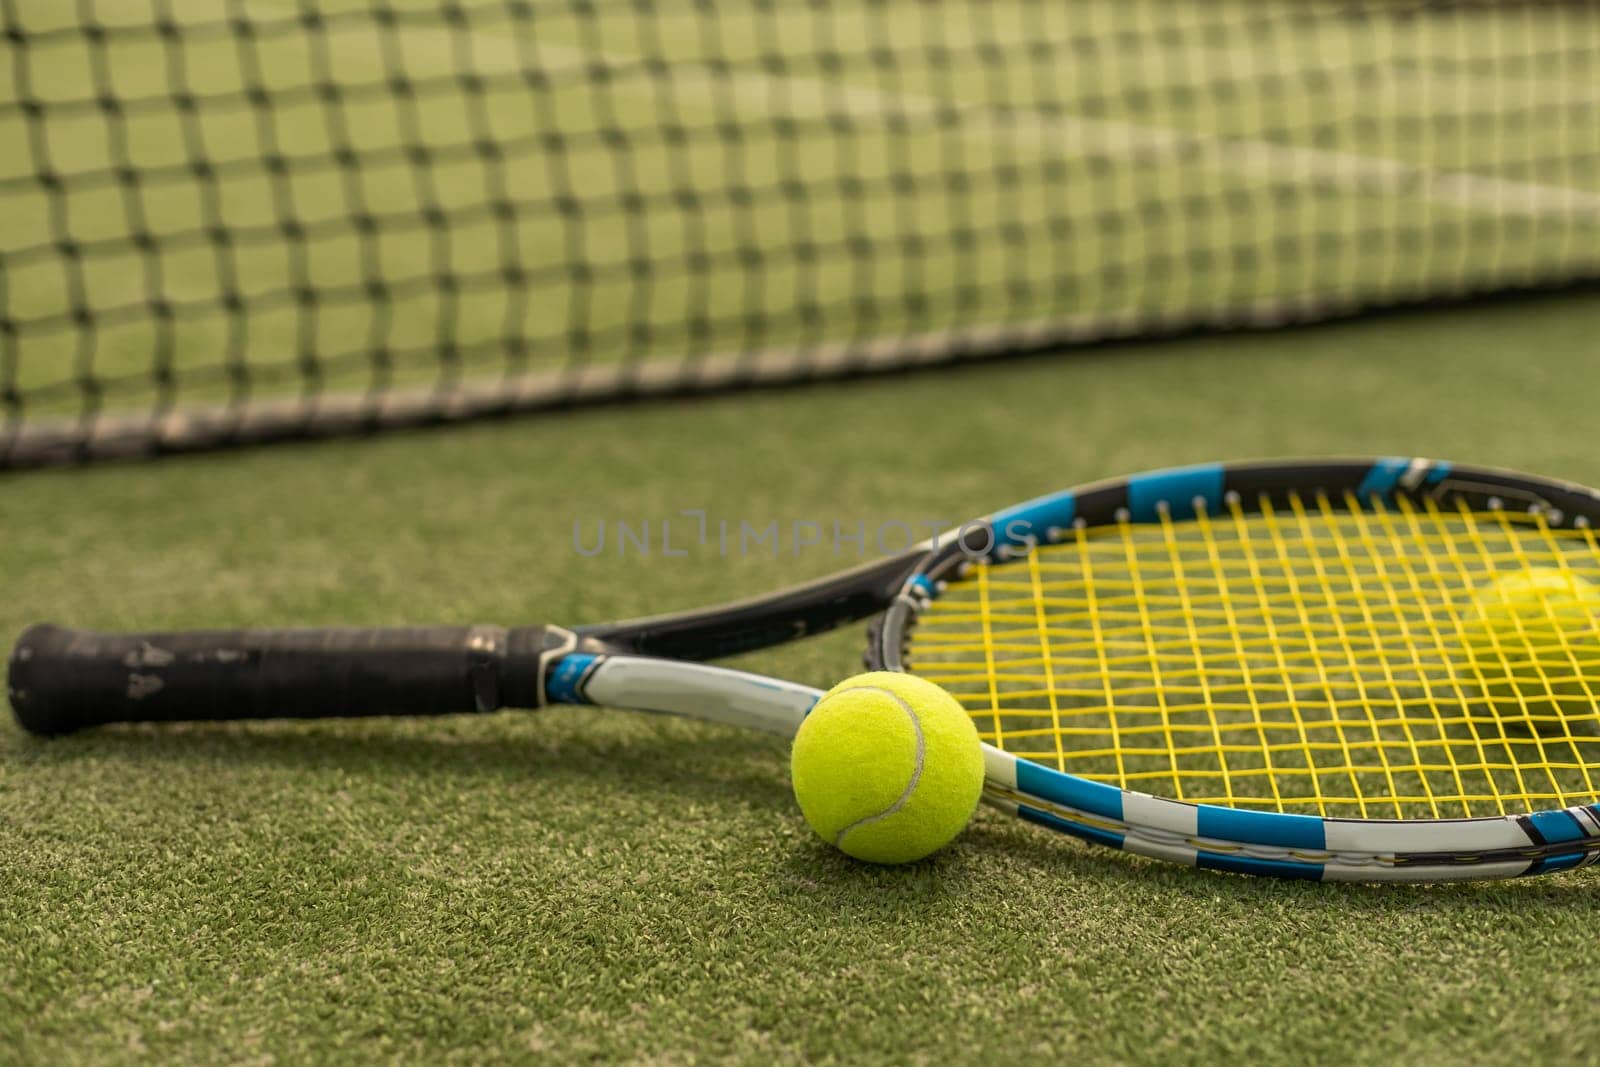 tennis racket with a tennis ball on a tennis court by Andelov13